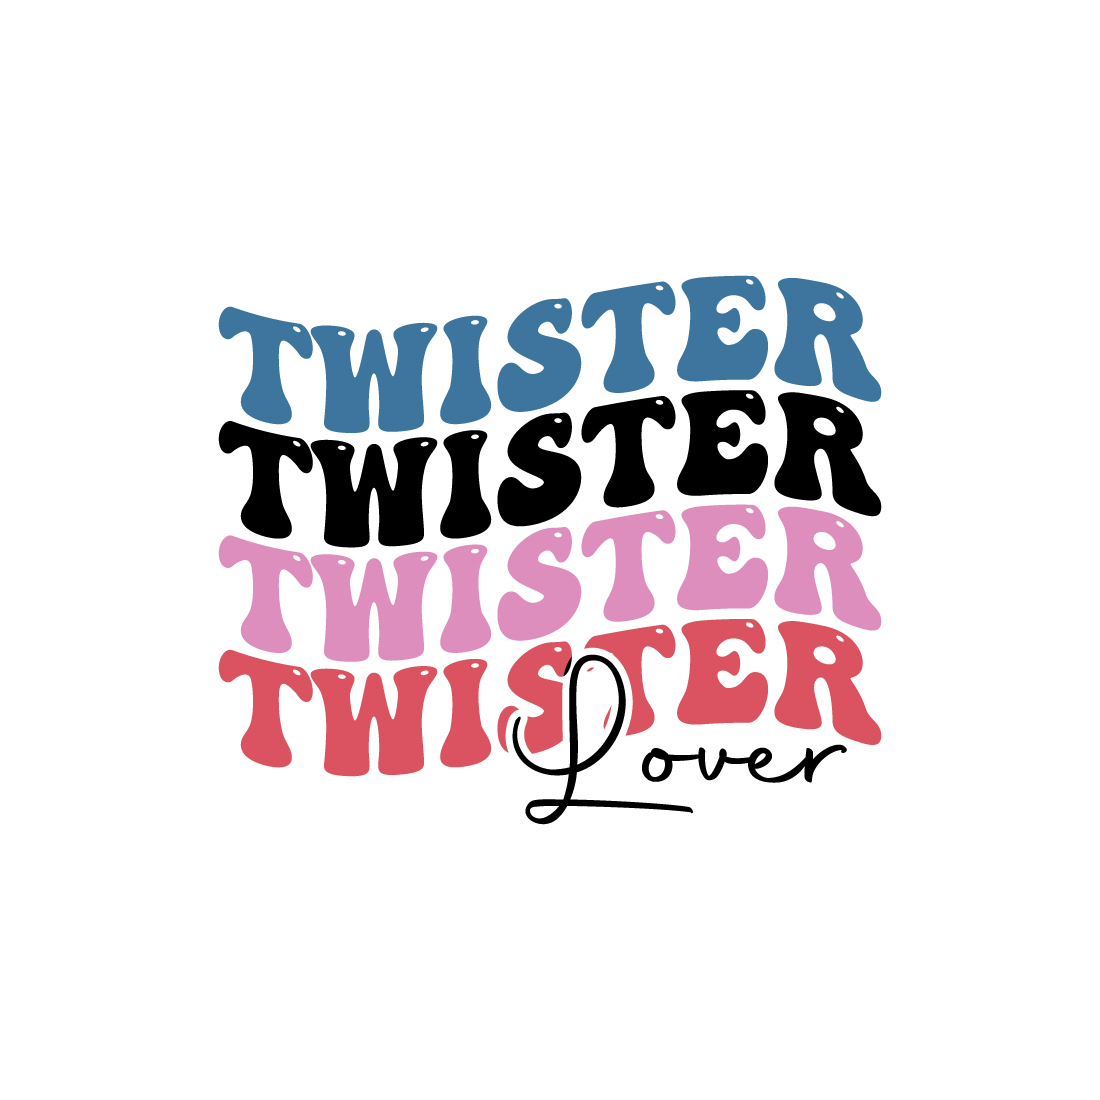 Twister lover indoor game retro typography design for t-shirts, cards, frame artwork, phone cases, bags, mugs, stickers, tumblers, print, etc preview image.